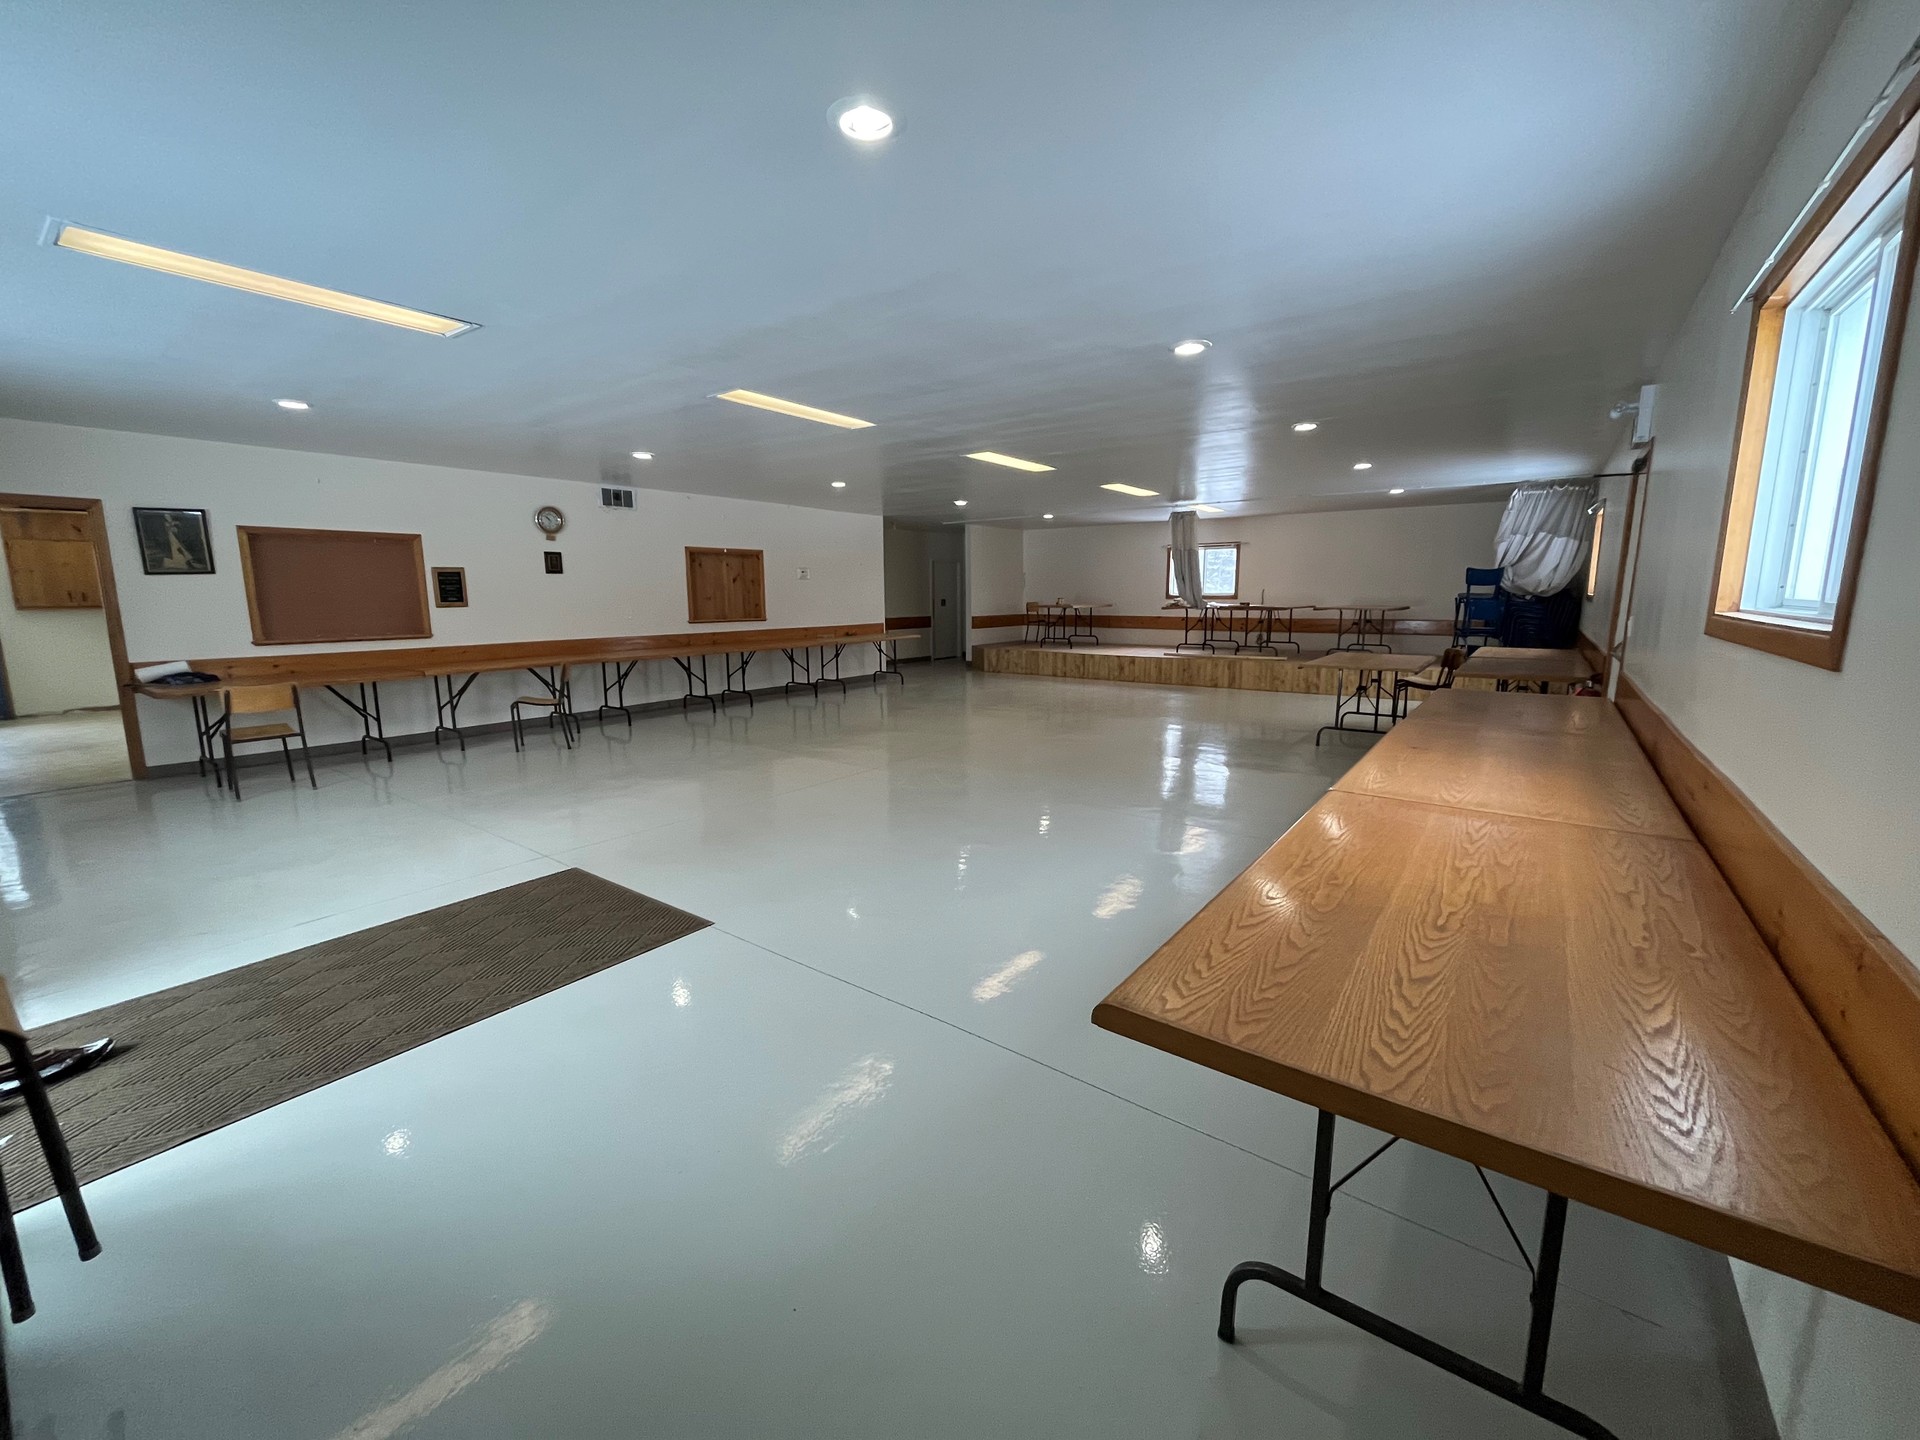 Ahmic Harbour Community Centre interior space with tables